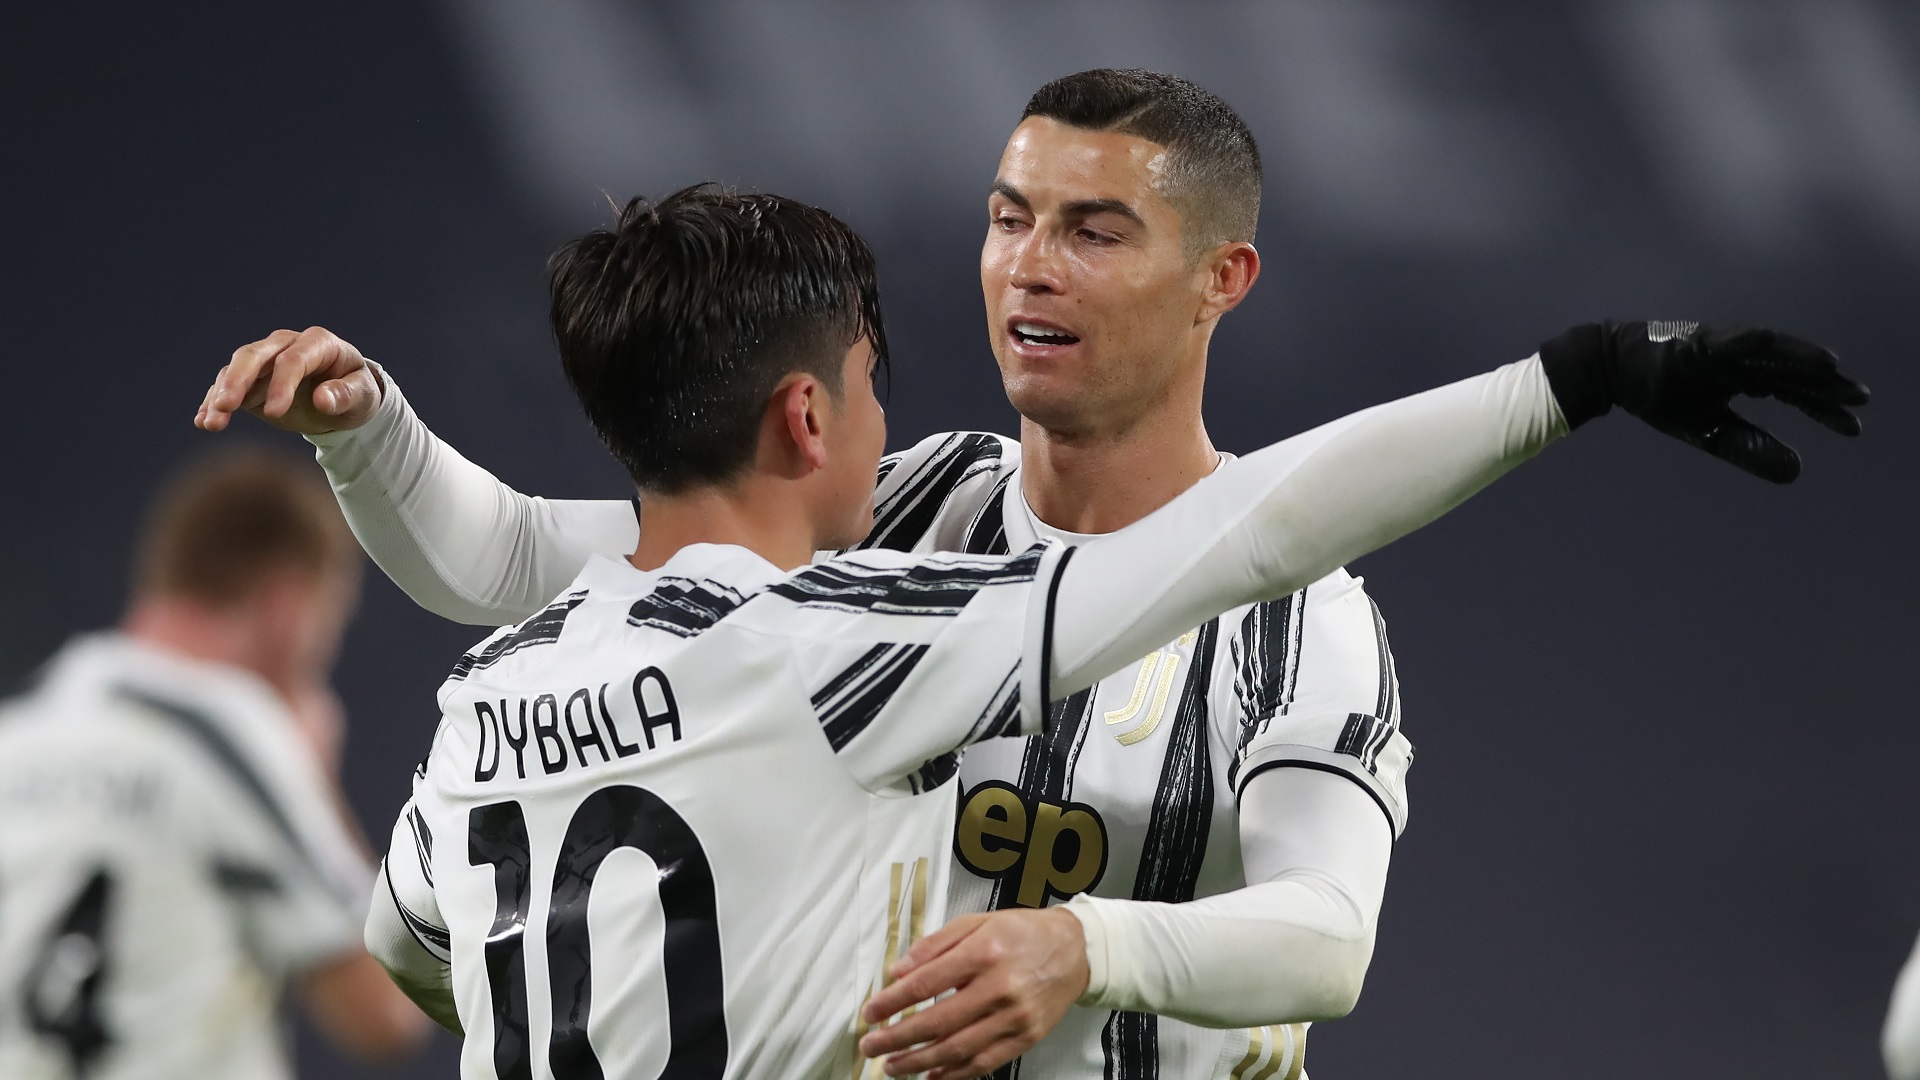 Cristiano Ronaldo has asked his lawyers to recoup €19M he believes Juventus owe him through the CONI’s College of Arbitration.